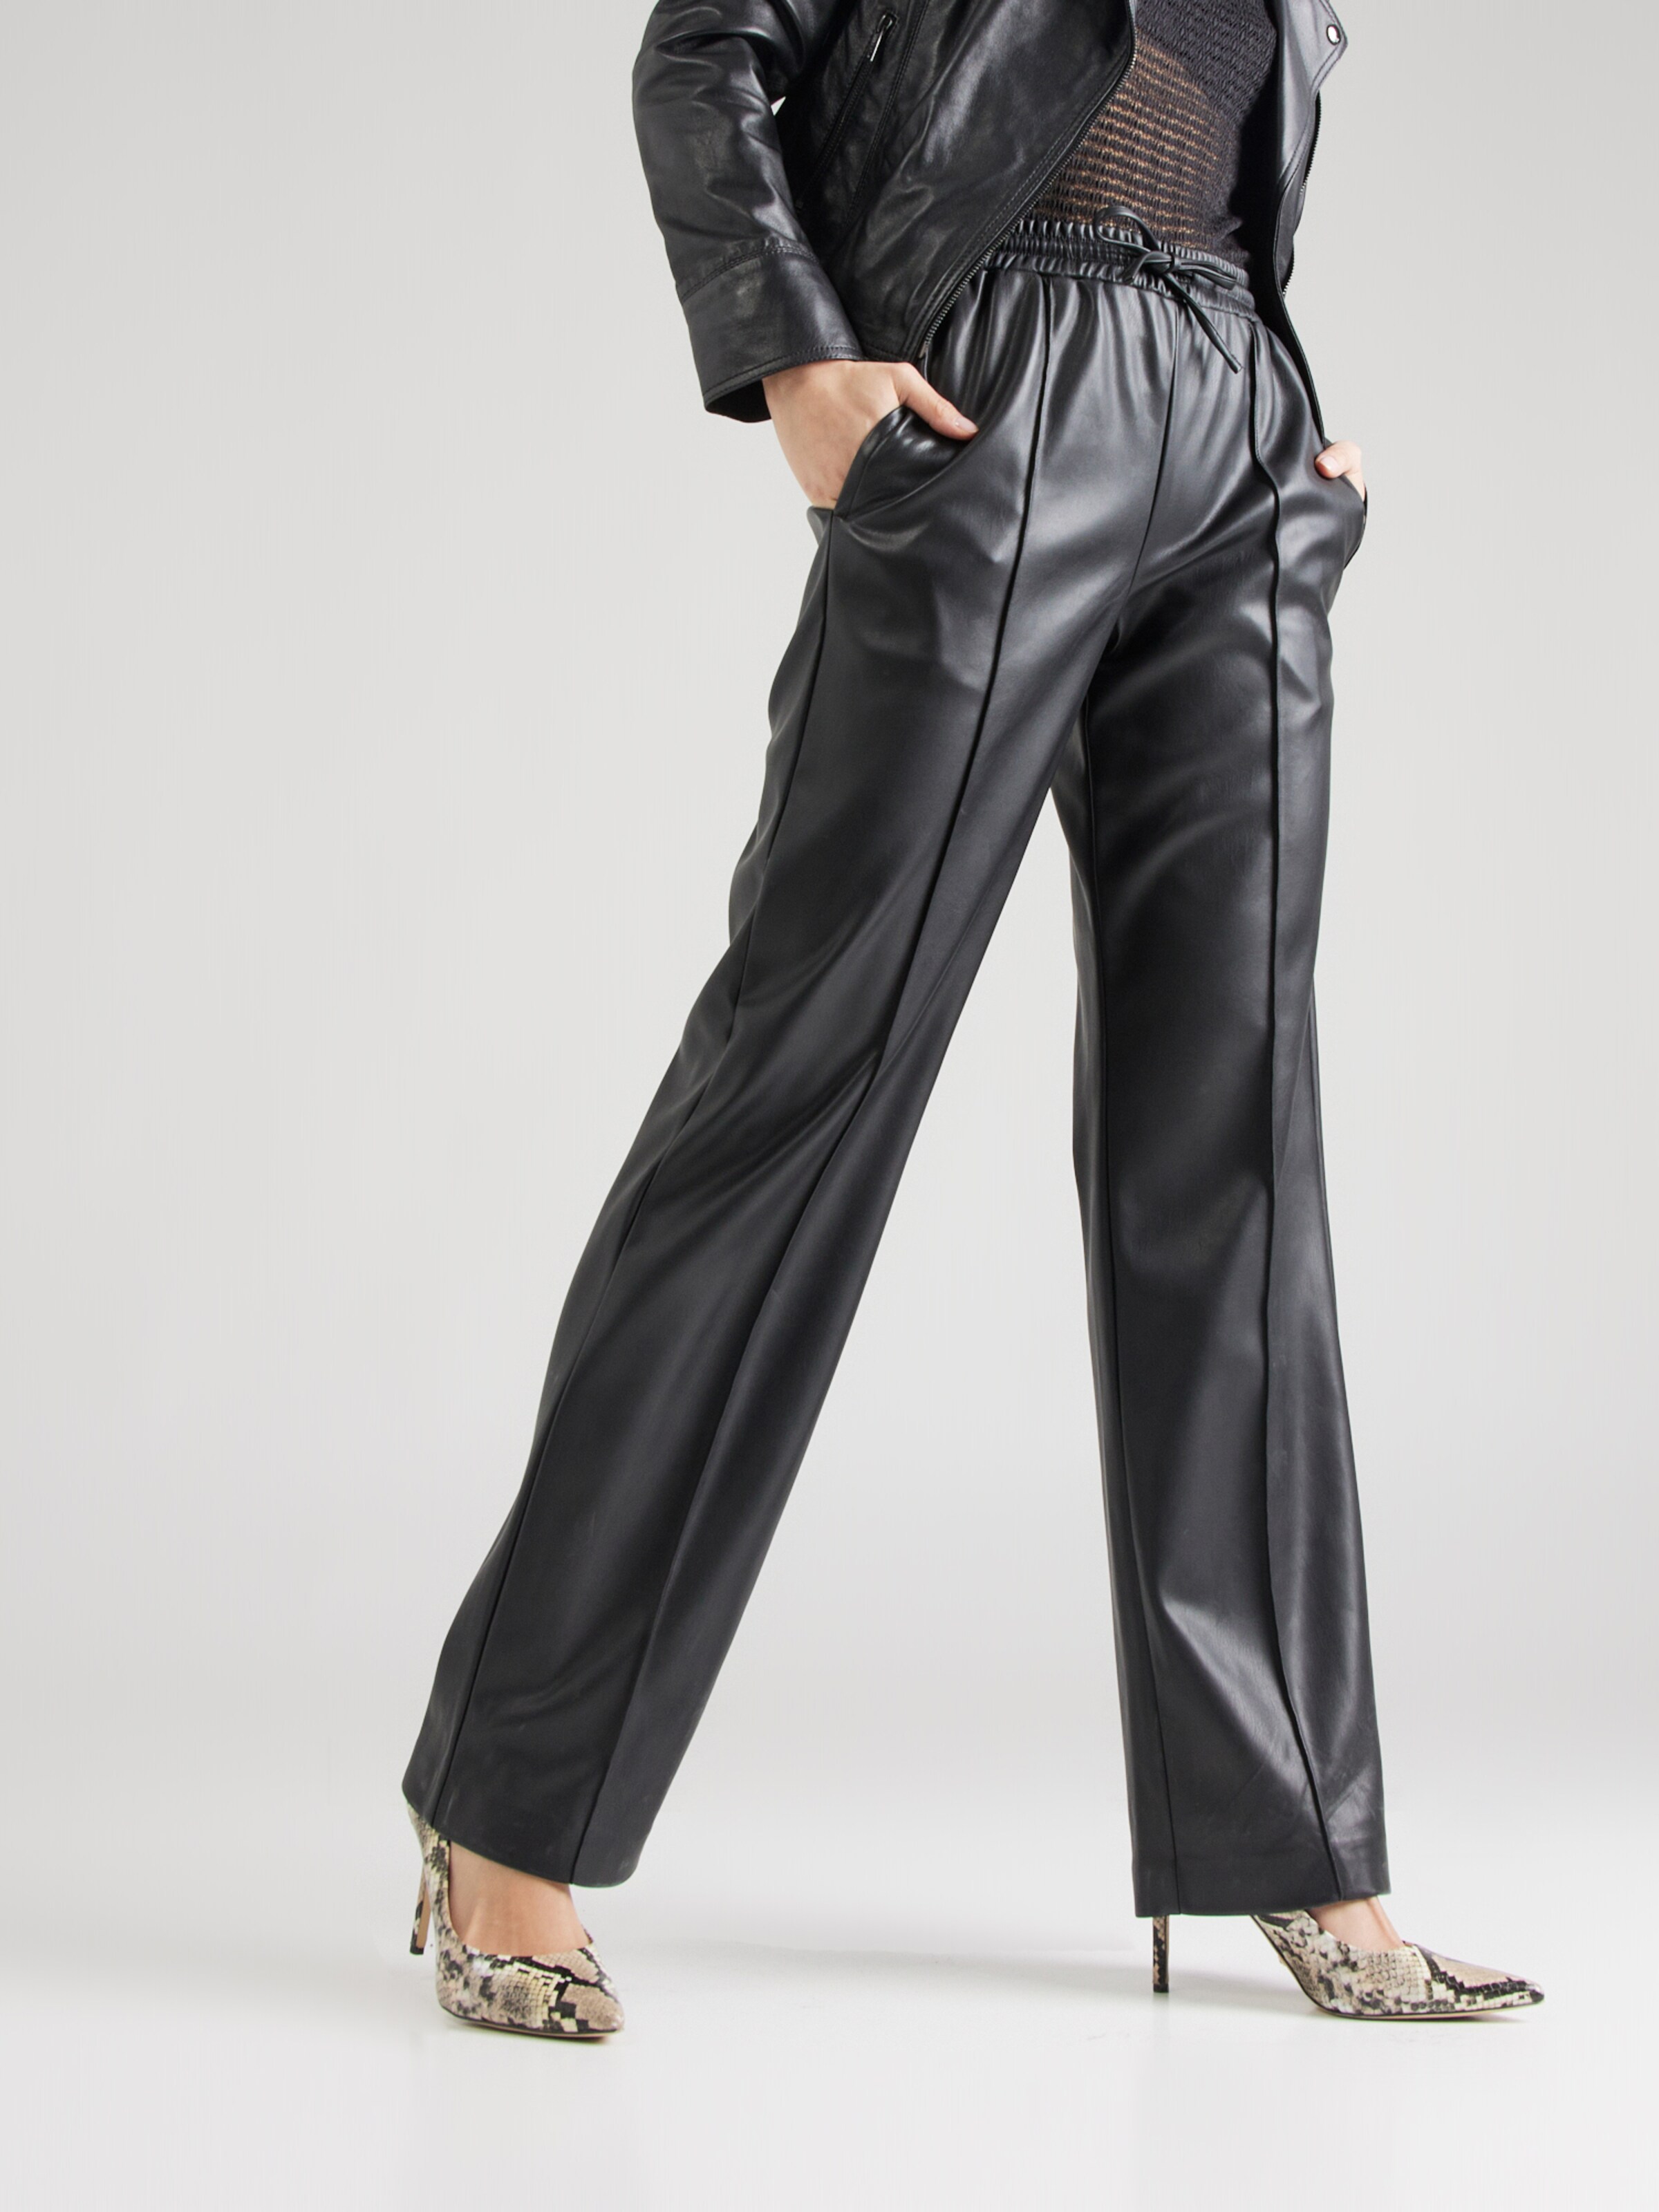 Vintage Style Wide Leg Black Leather Trousers for Women | Free Shipping  Included